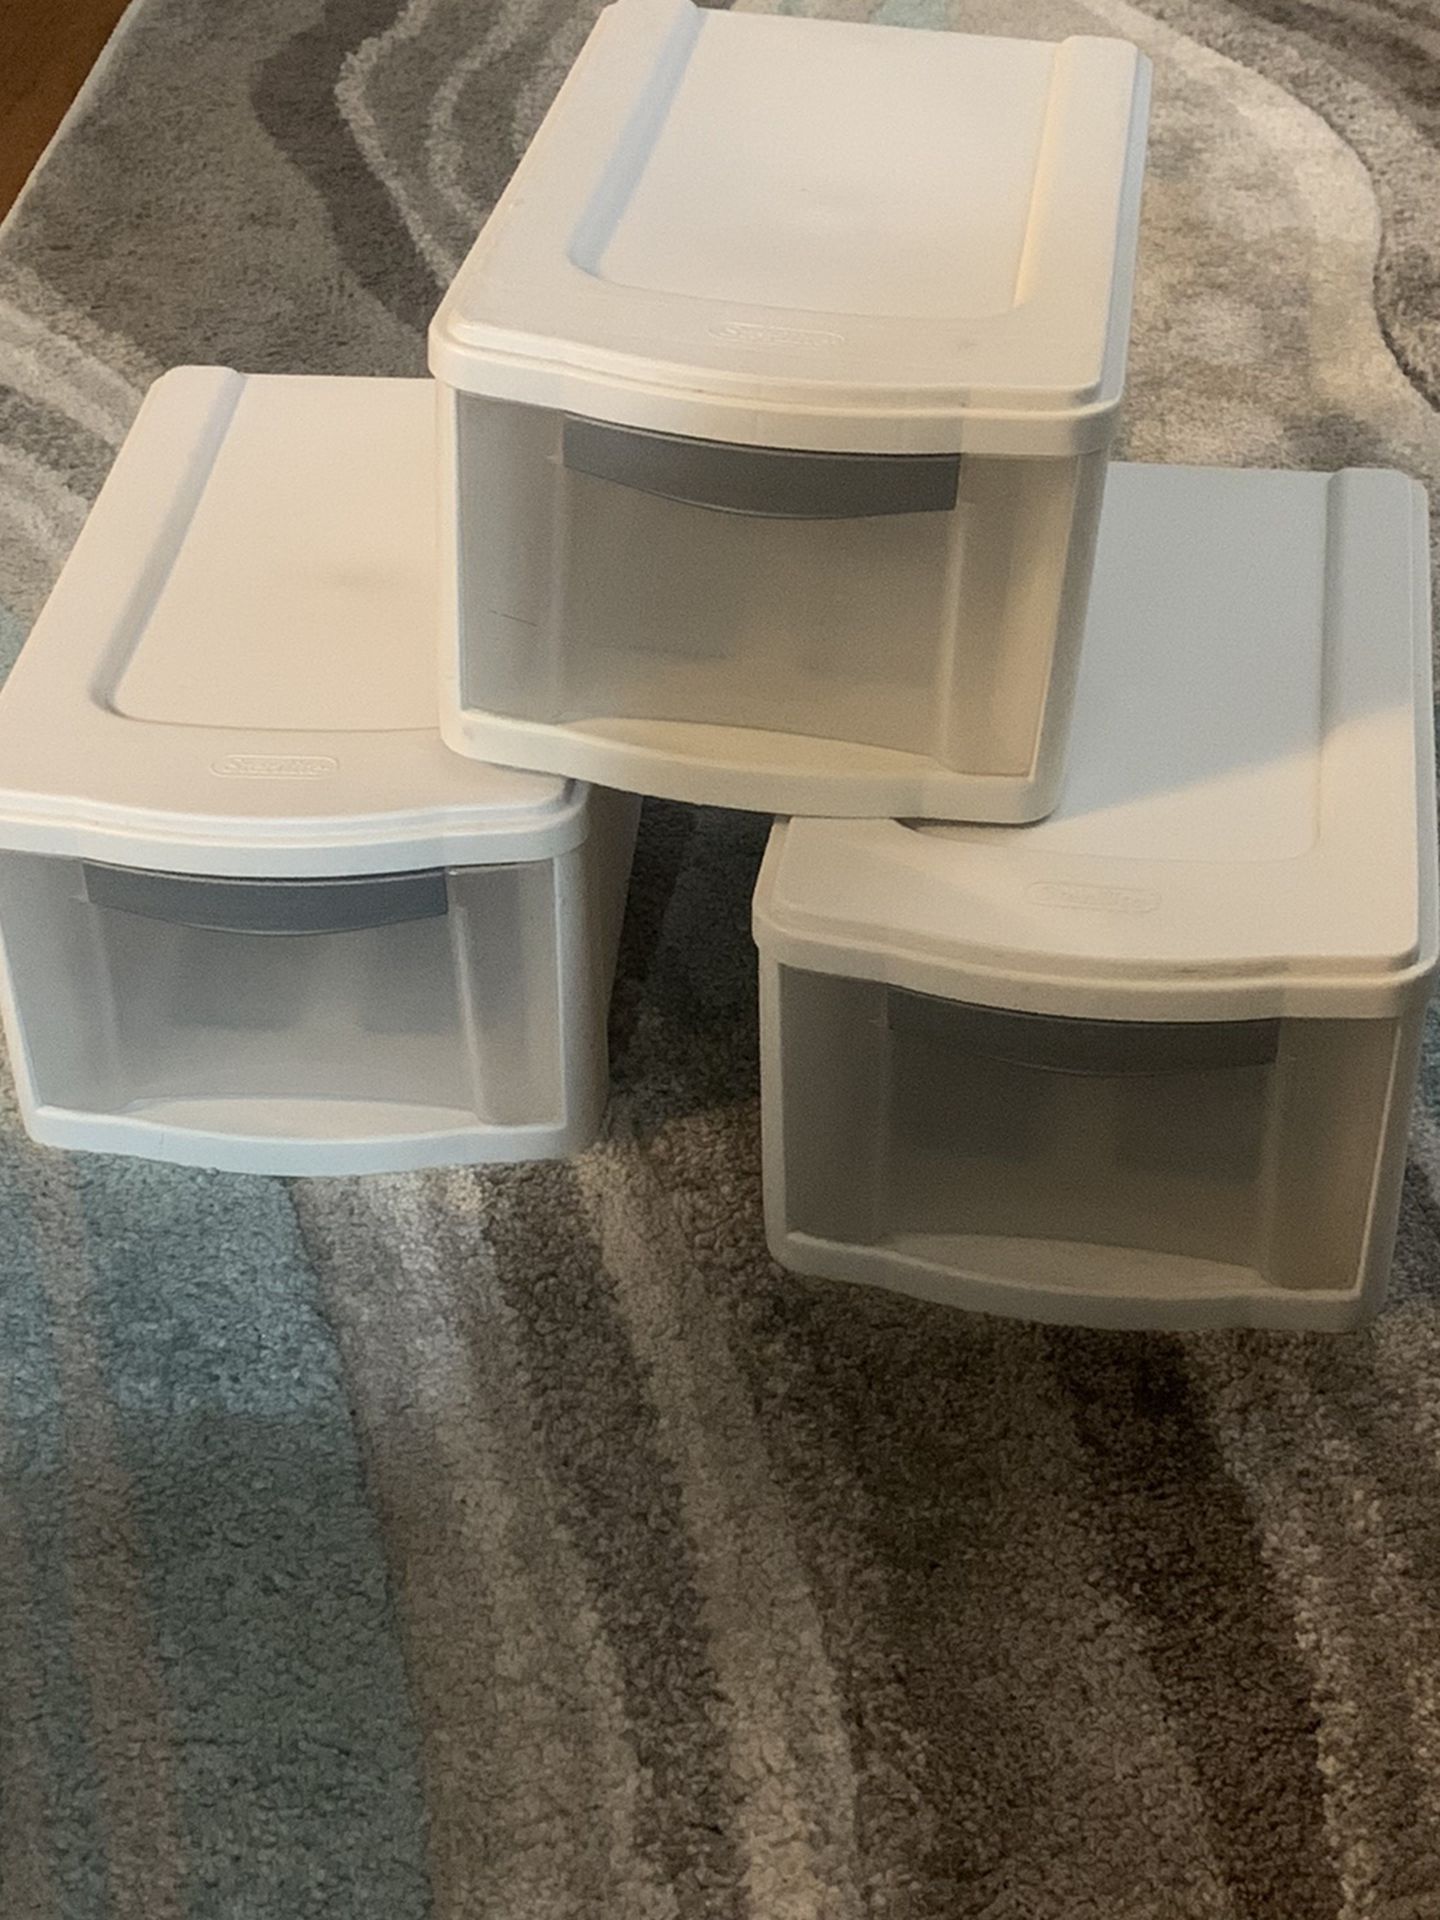 Stoarage Containers